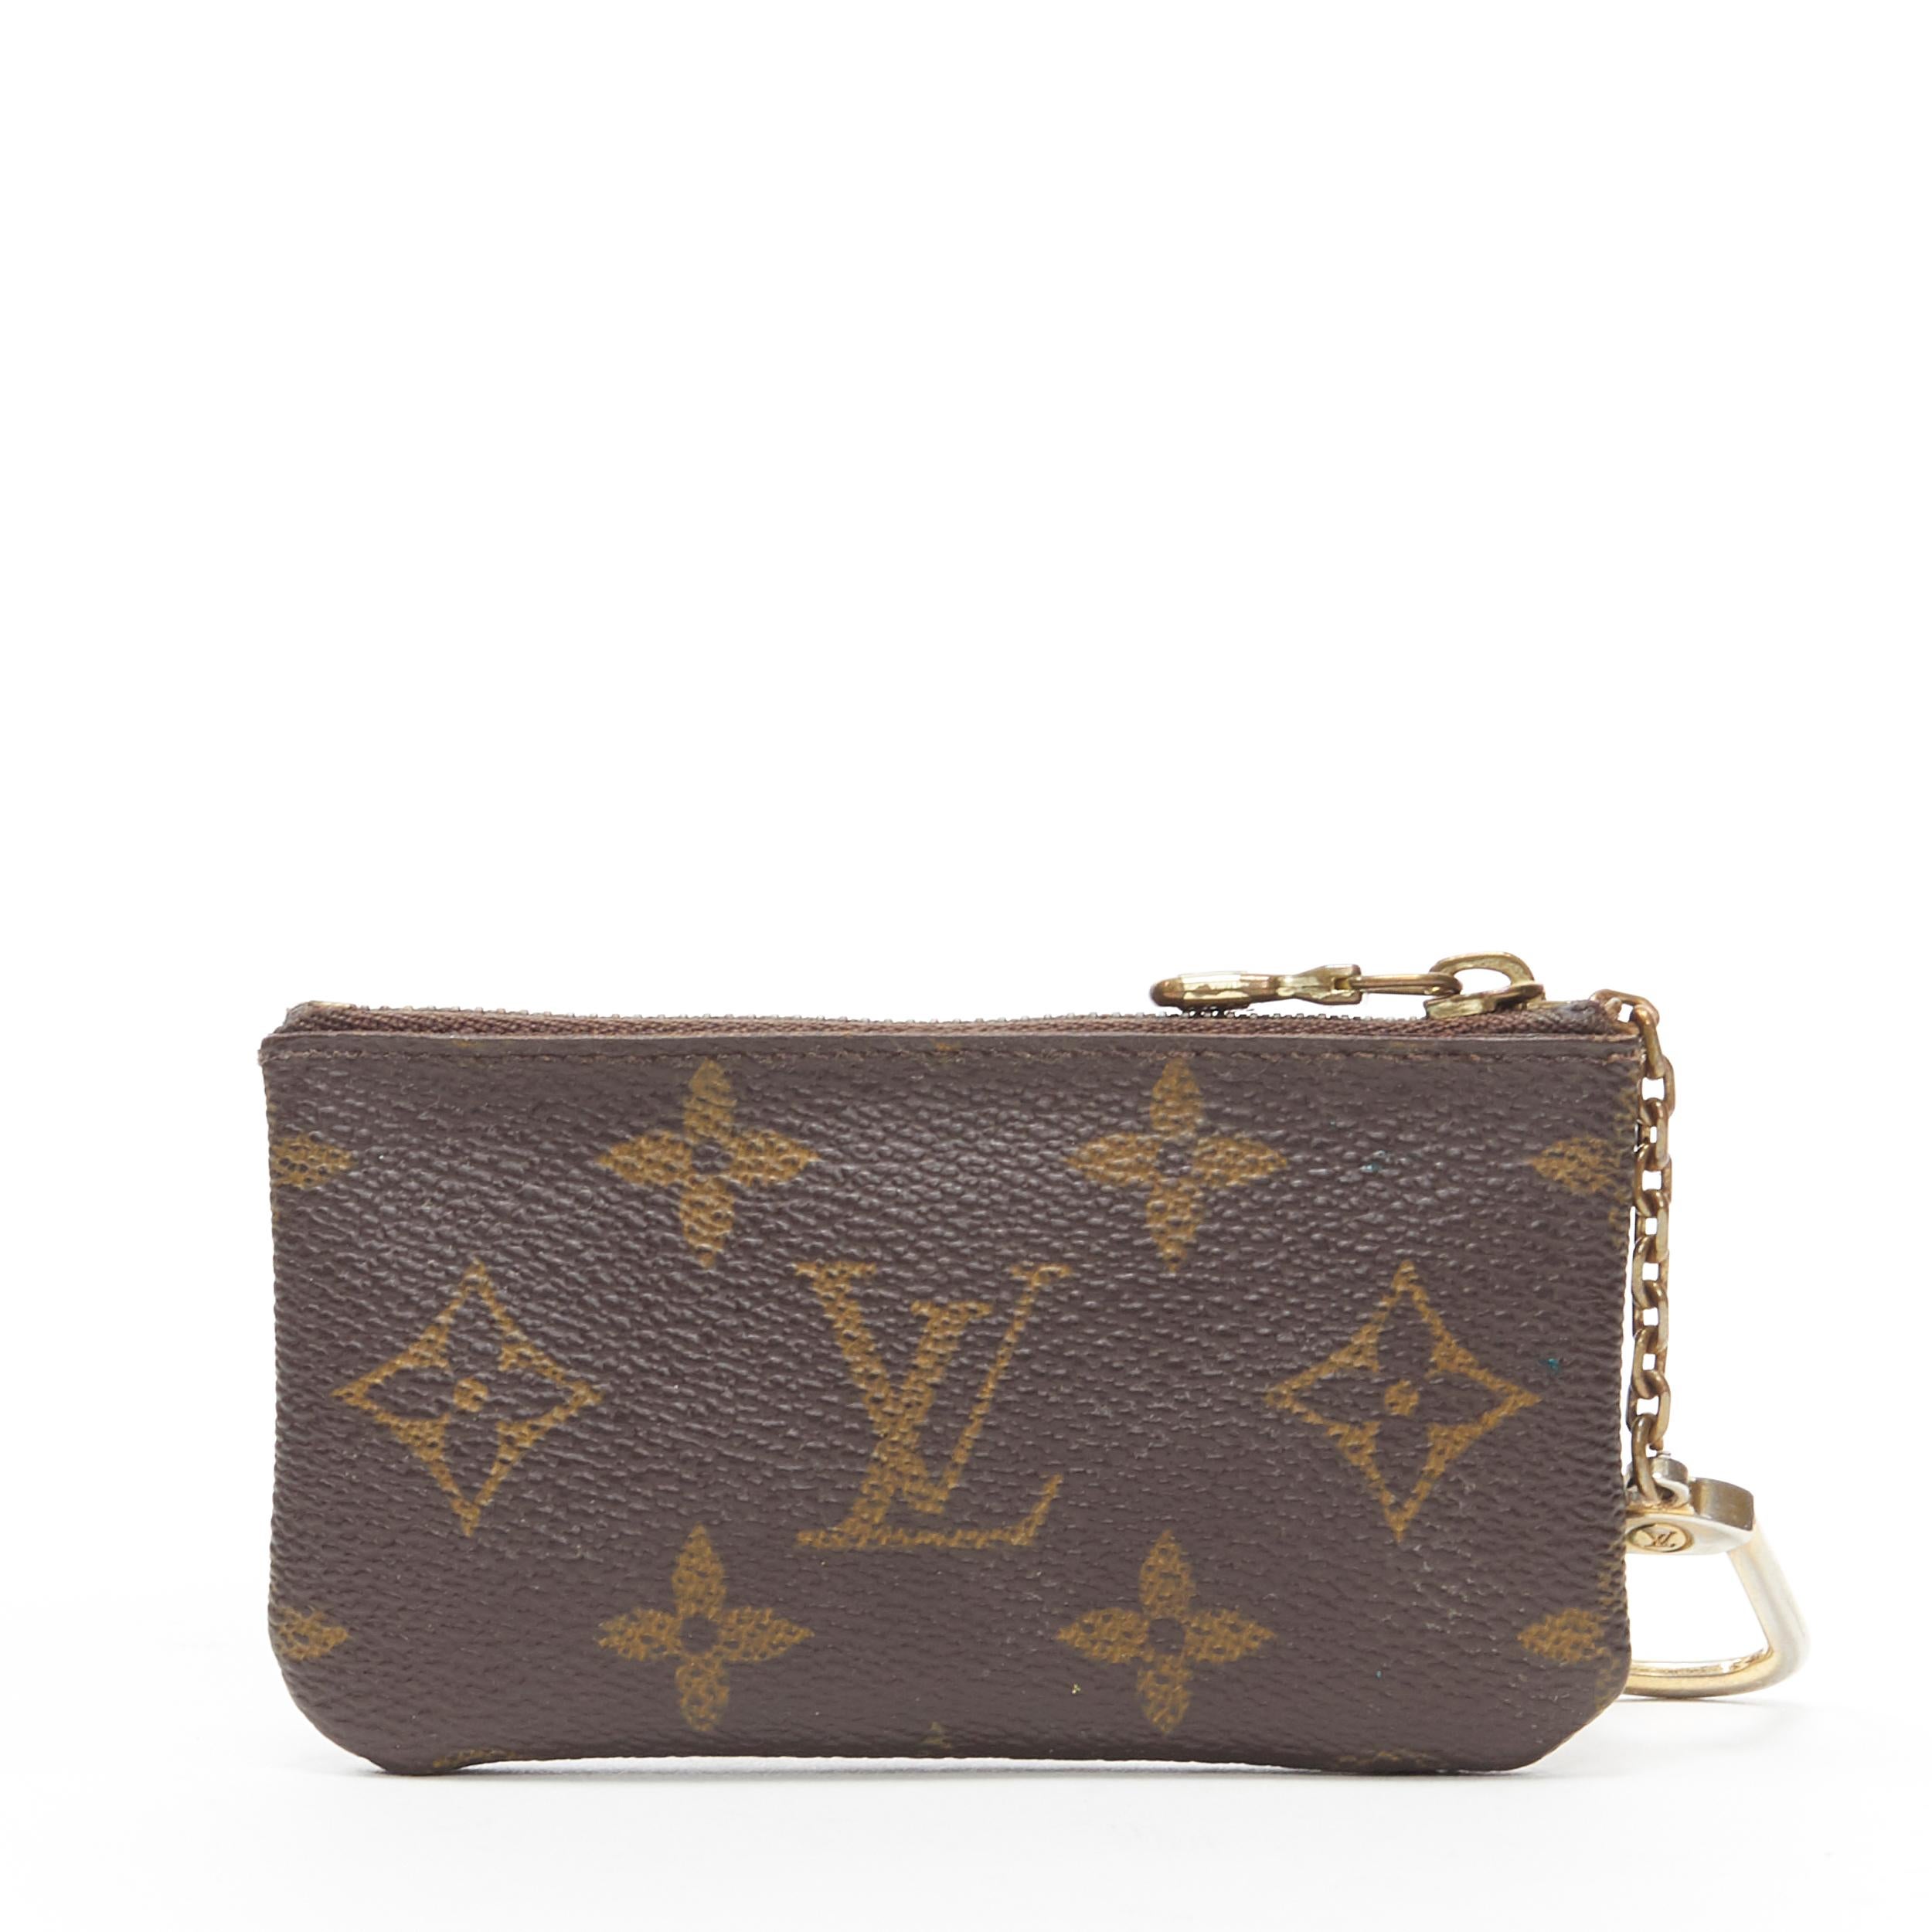 vintage LOUIS VUITTON brown monogram canvas top zip small pouch coins bag
Brand: Louis Vuitton
Model Name / Style: Coins bag
Material: Other; coated canvas
Color: Brown
Pattern: Other
Closure: Zip
Extra Detail: Lobster clasp on chain.
Made in: